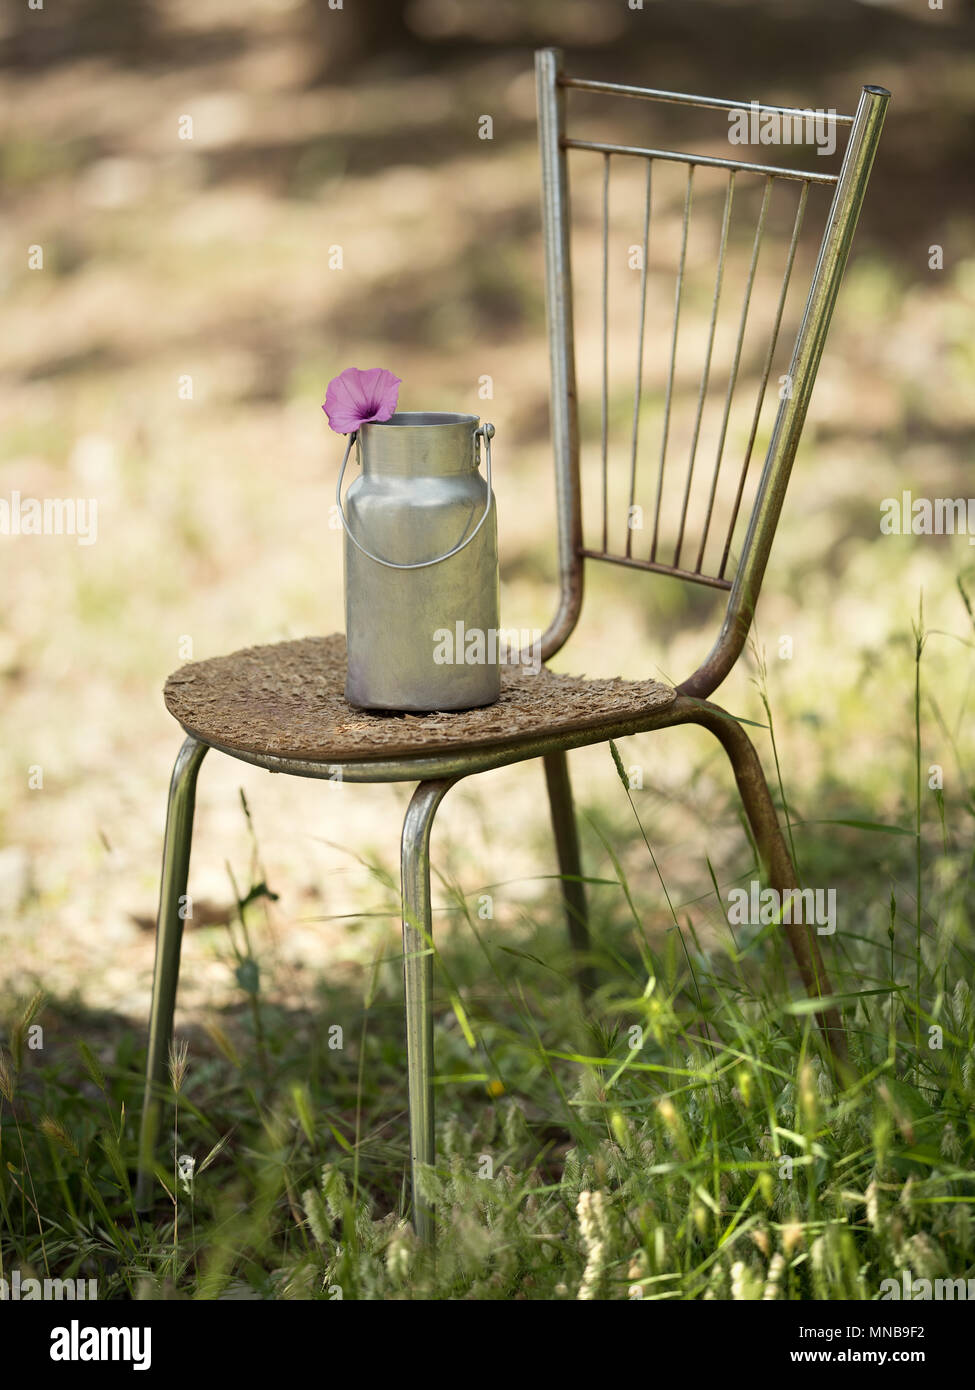 Retro little barrel for milk stands on a chair against a background of  nature Stock Photo - Alamy